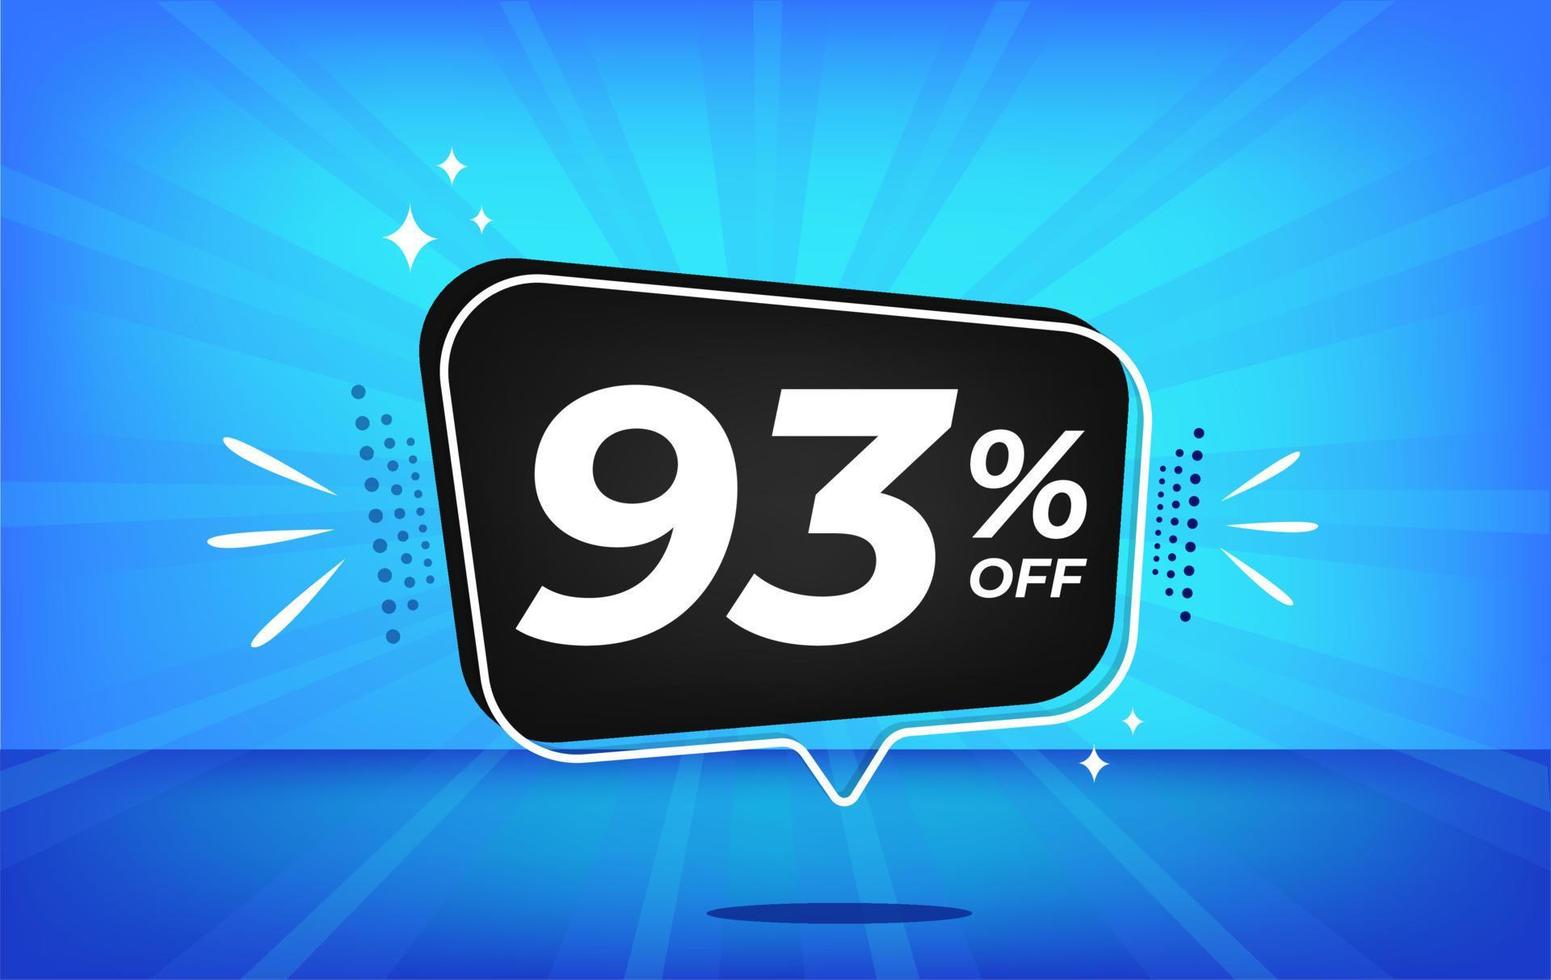 93 percent off. Blue banner with ninety-three percent discount on a black balloon for mega big sales. vector